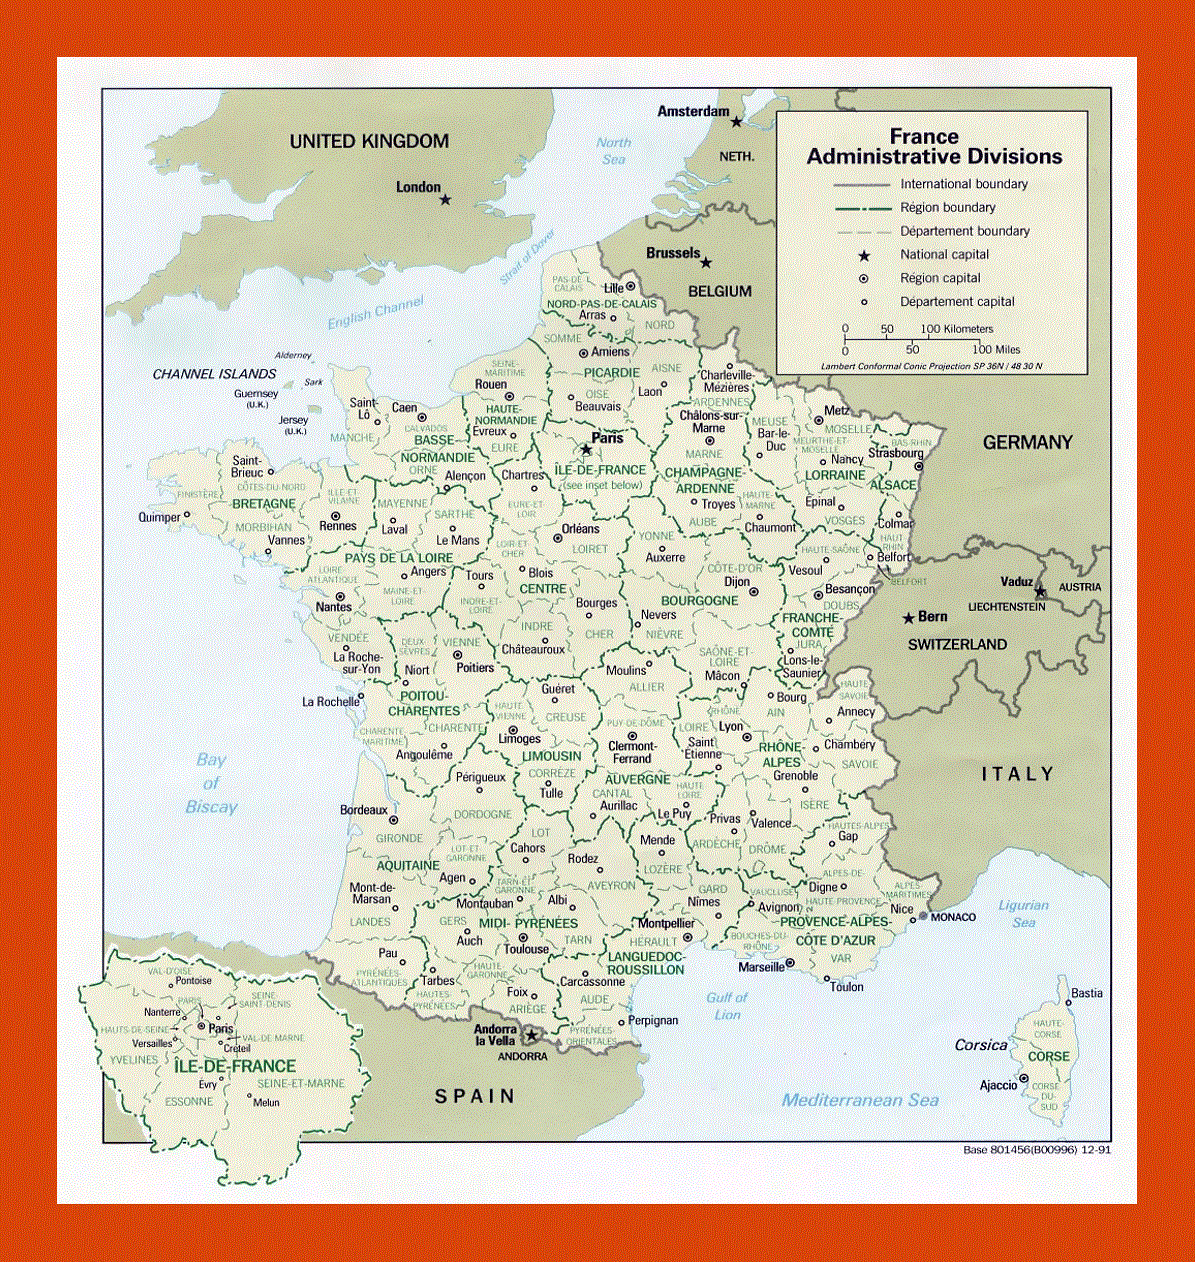 Administrative divisions map of France - 1991